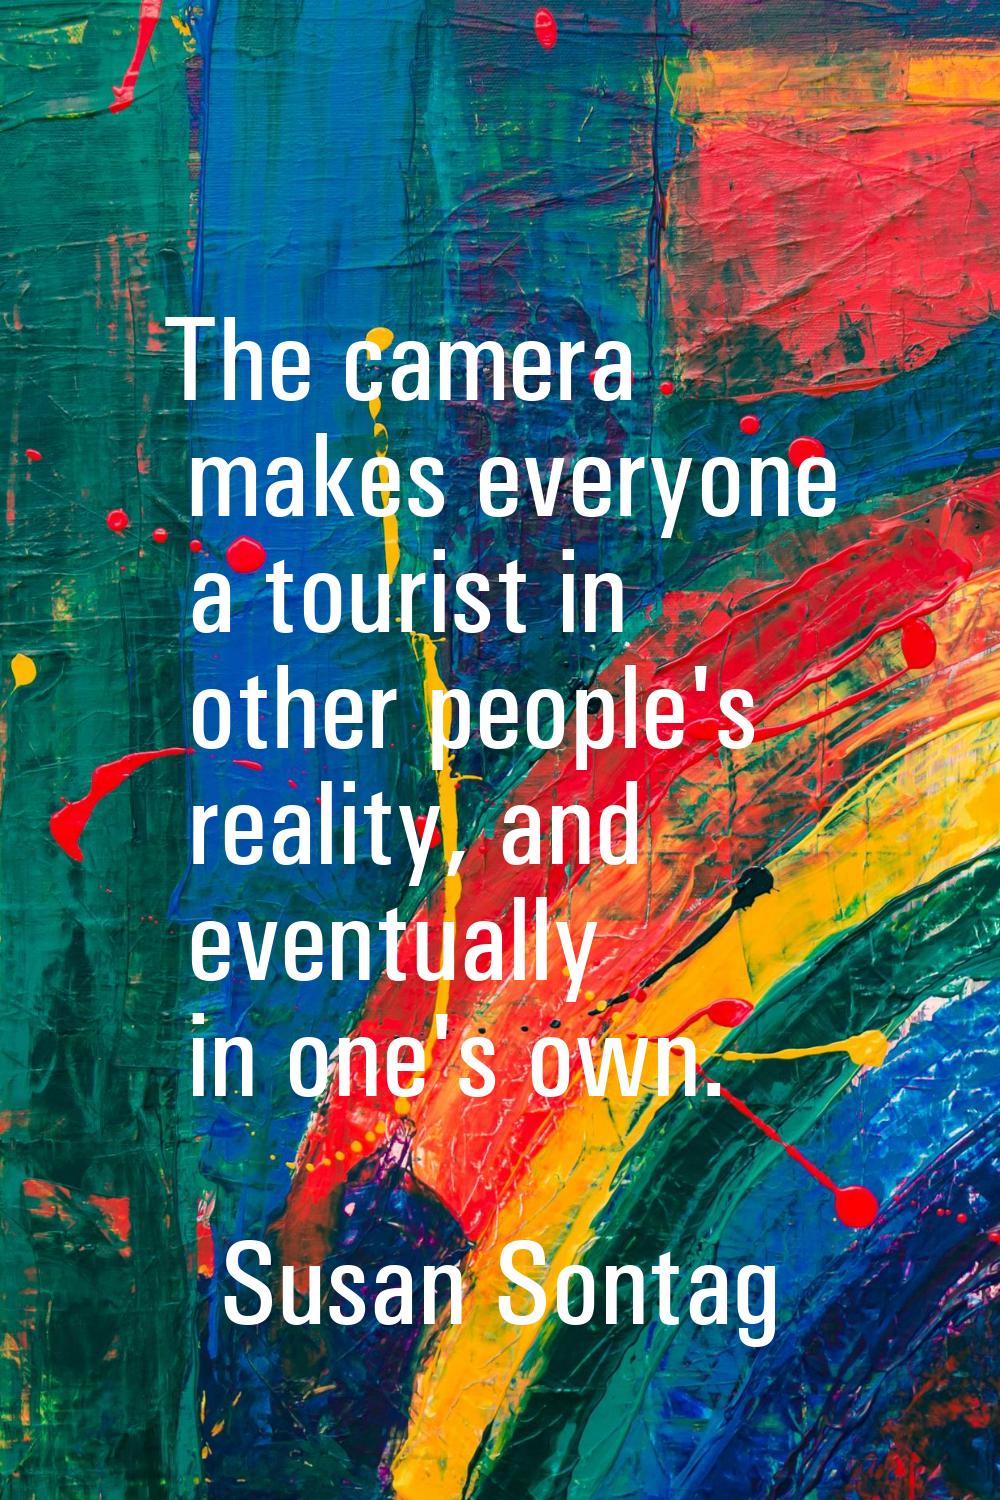 The camera makes everyone a tourist in other people's reality, and eventually in one's own.